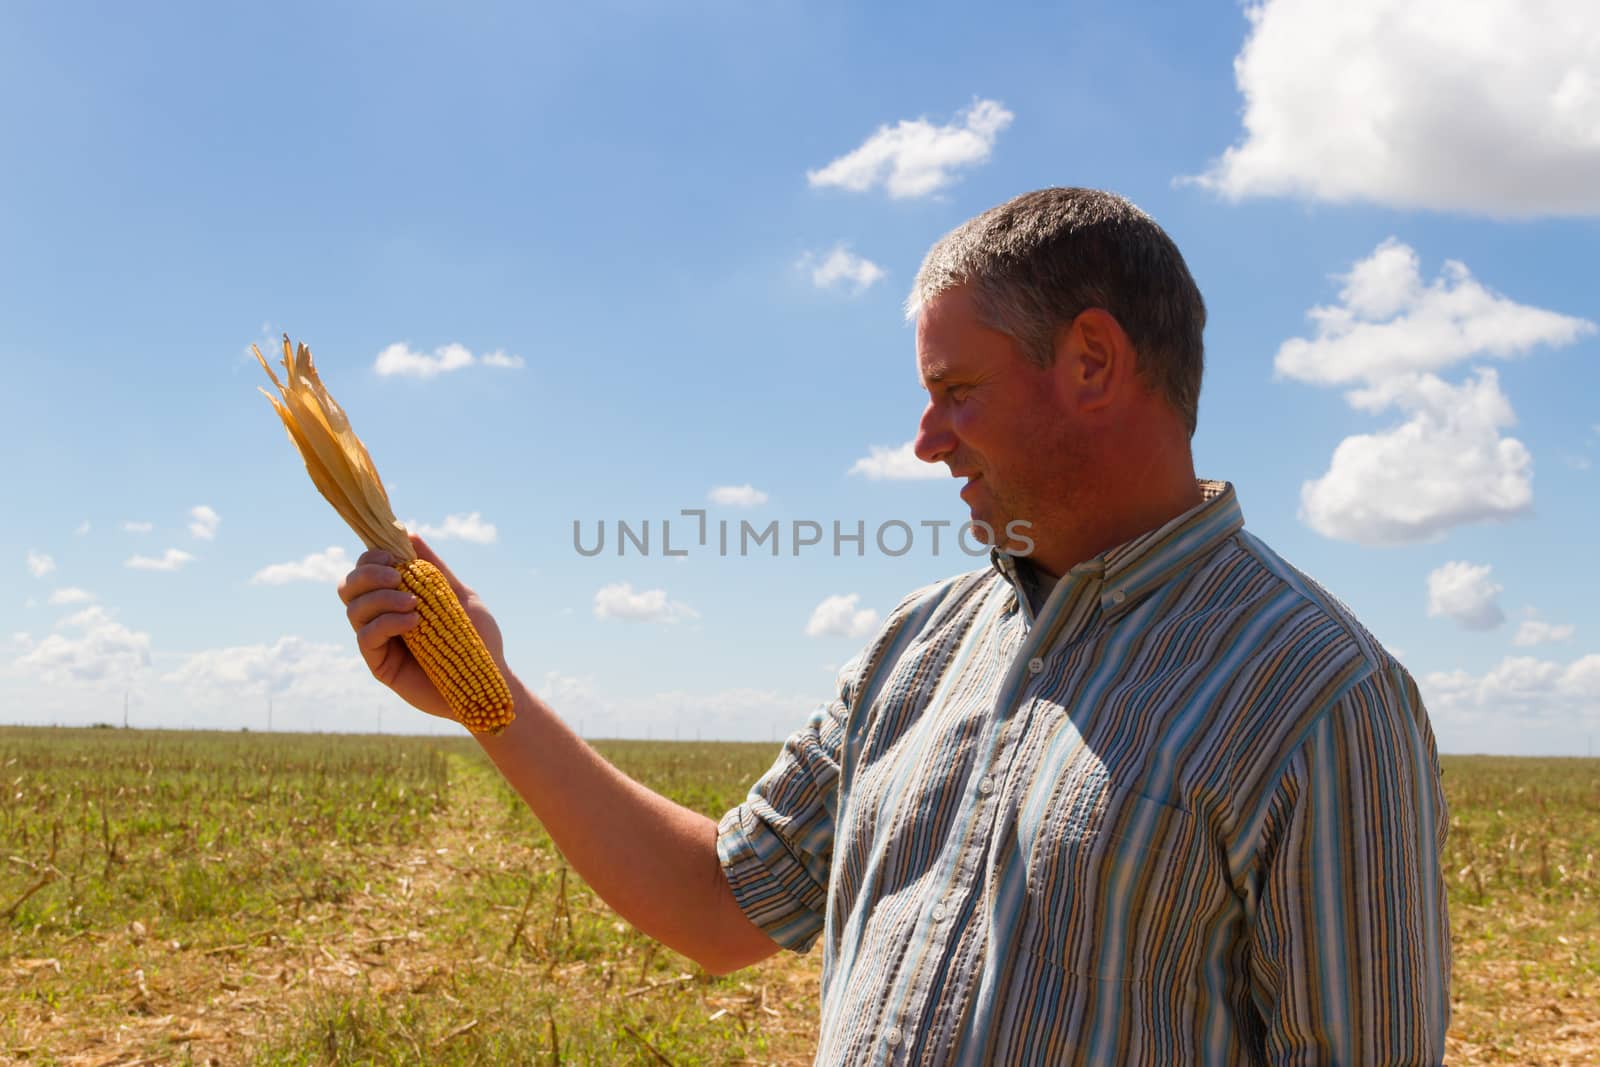 country man in the stubble of the corn crop